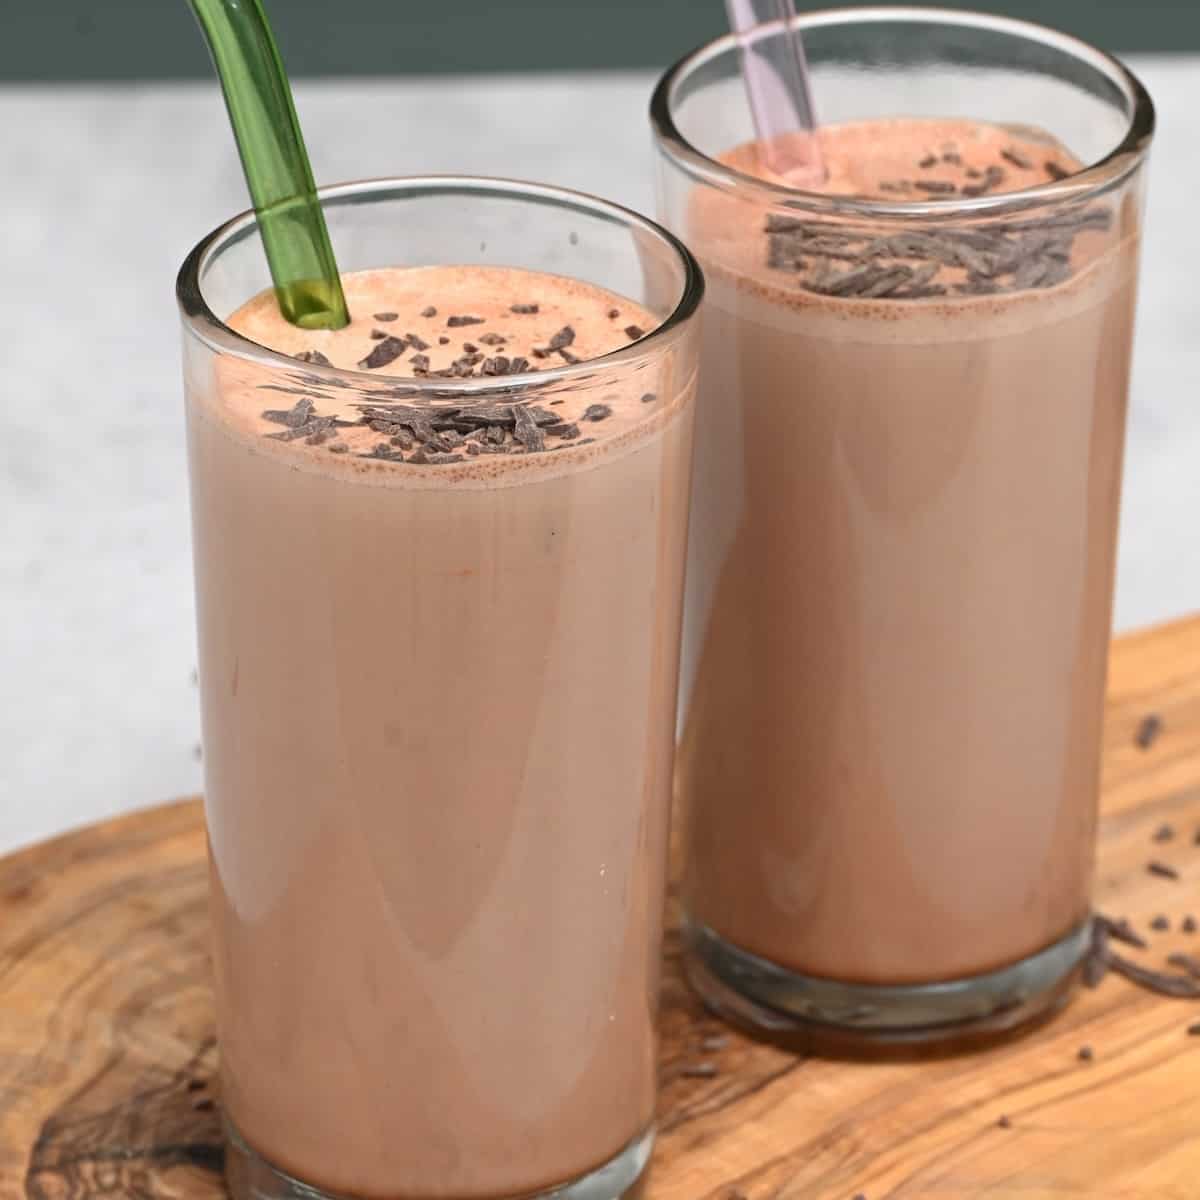 Two glasses with chocolate milk and glass straws